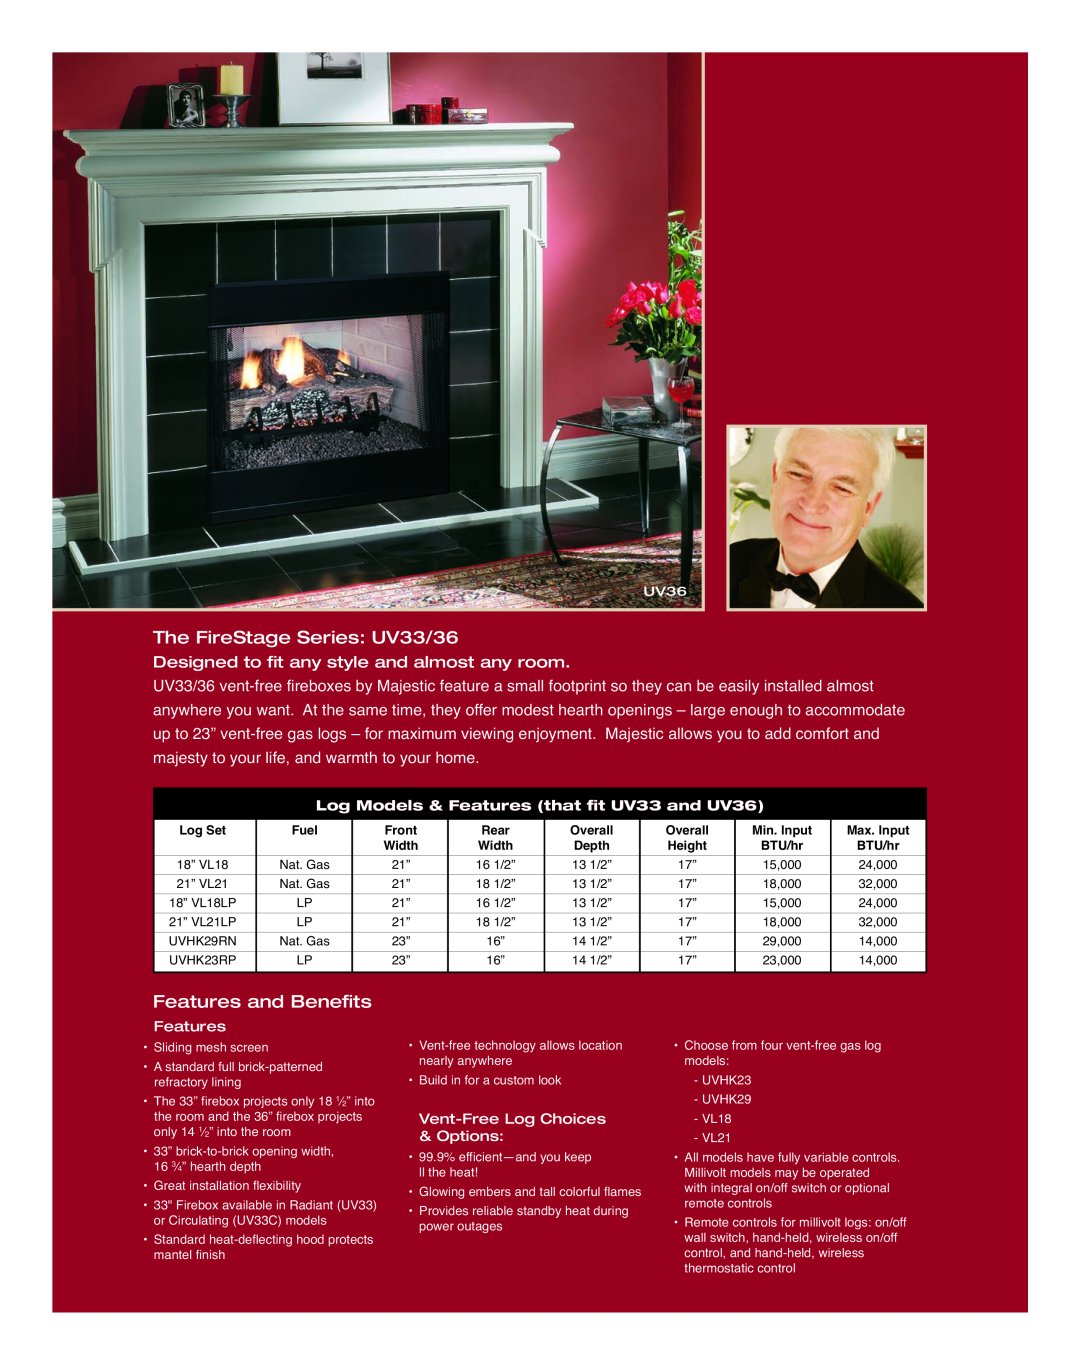 Majestic Appliances The FireStage Series UV33/36, Features and Benefits, Designed to fit any style and almost any room 